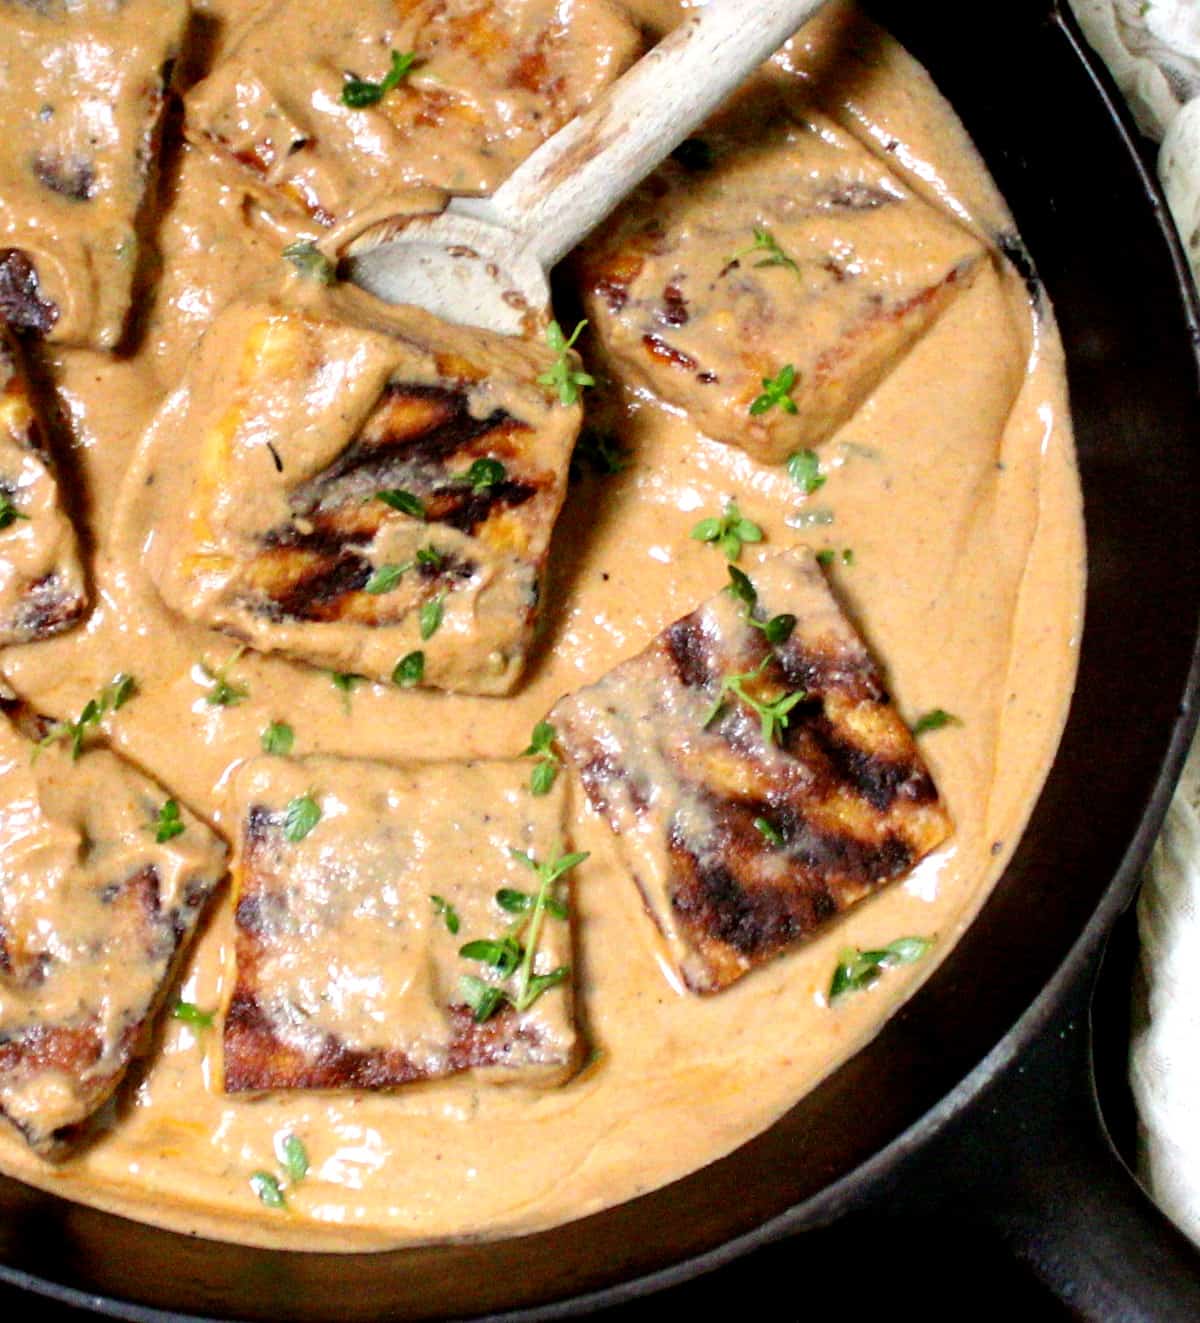 Overhead closeup of grilled tofu steaks in a creamy vegan Cajun sauce in a cast iron skillet with a wooden ladle and cheesecloth